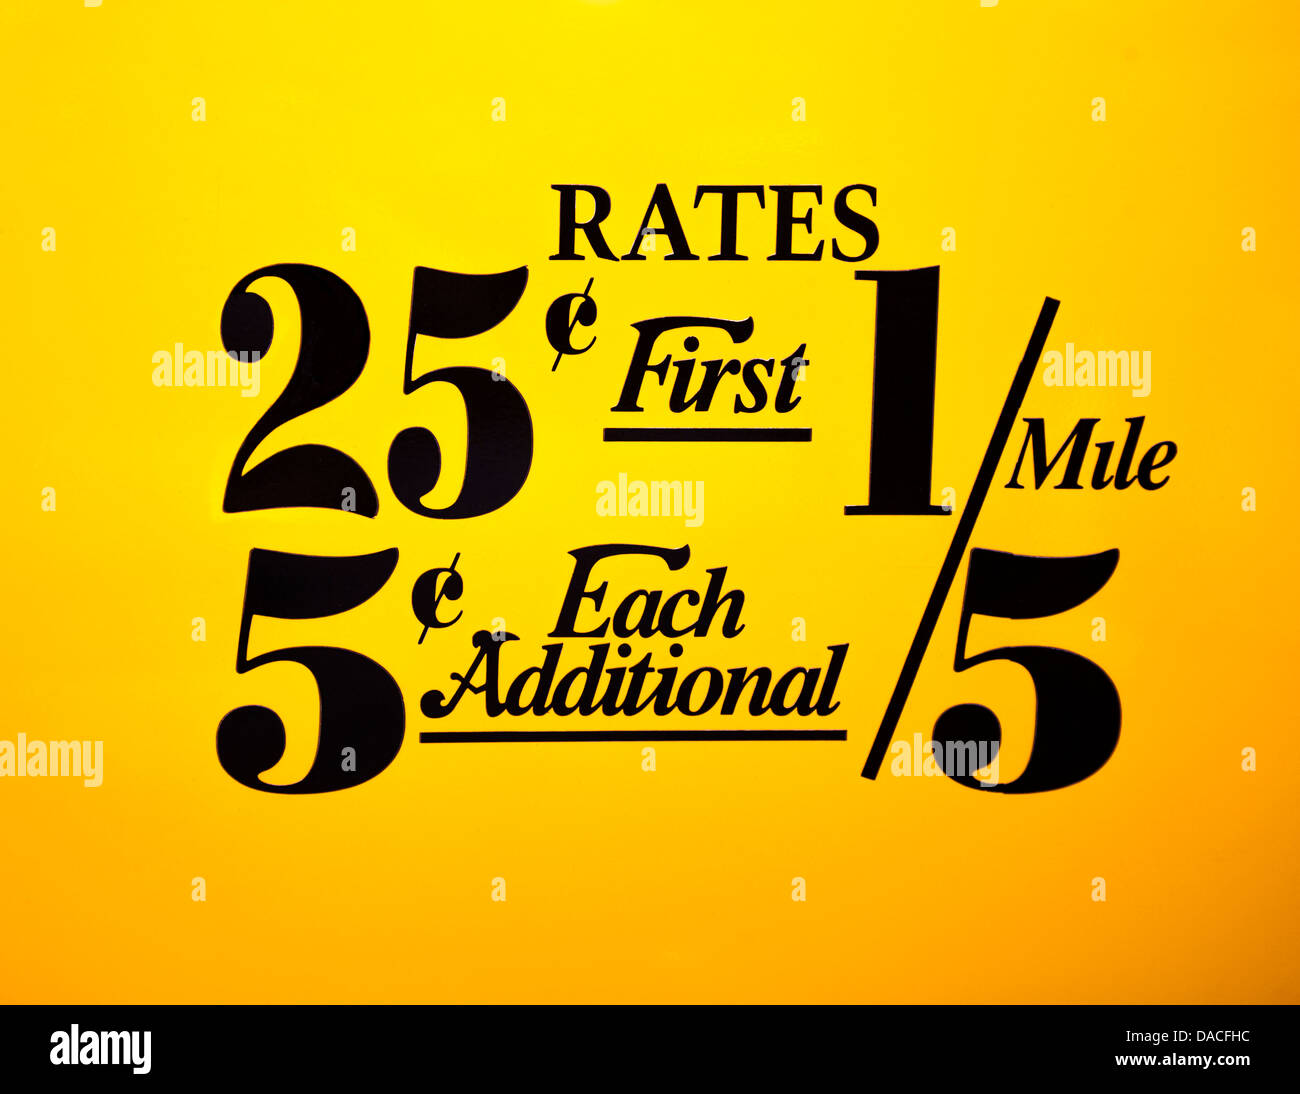 NYC taxi mileage rates displayed on a vintage yellow taxi door, New York City, USA. Stock Photo